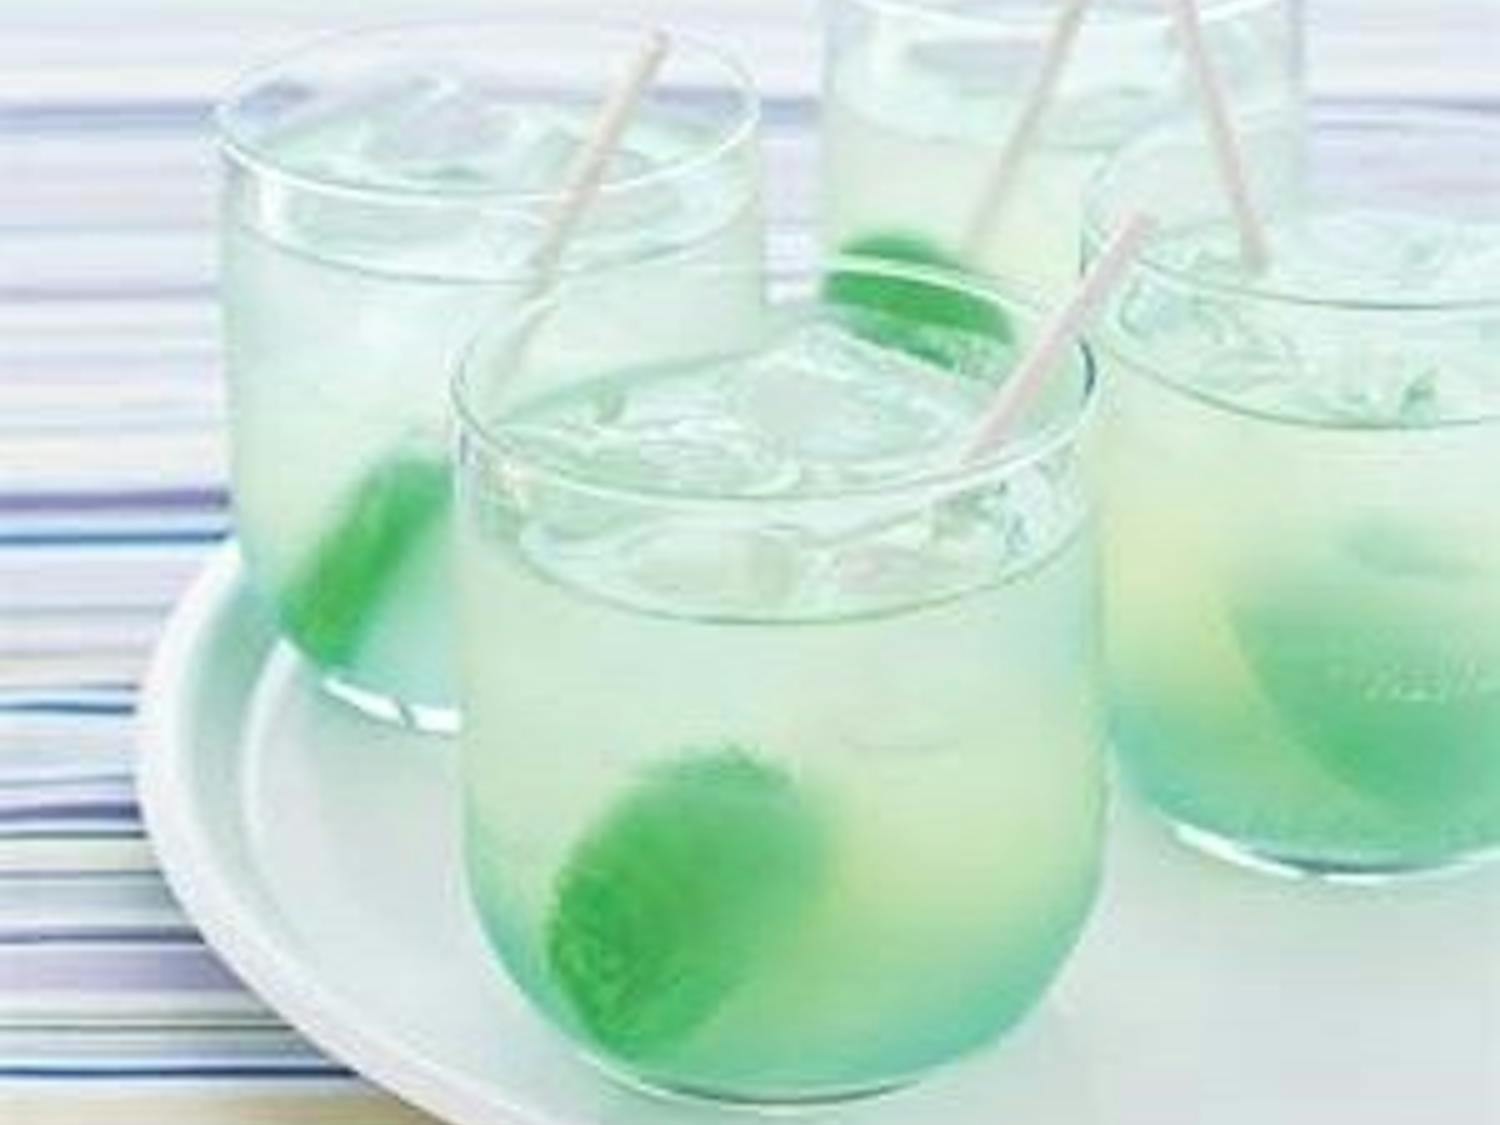 Putting lollipops into drinks gives your old drink a new pop that you never thought it could! Photo from Realsimple.com.